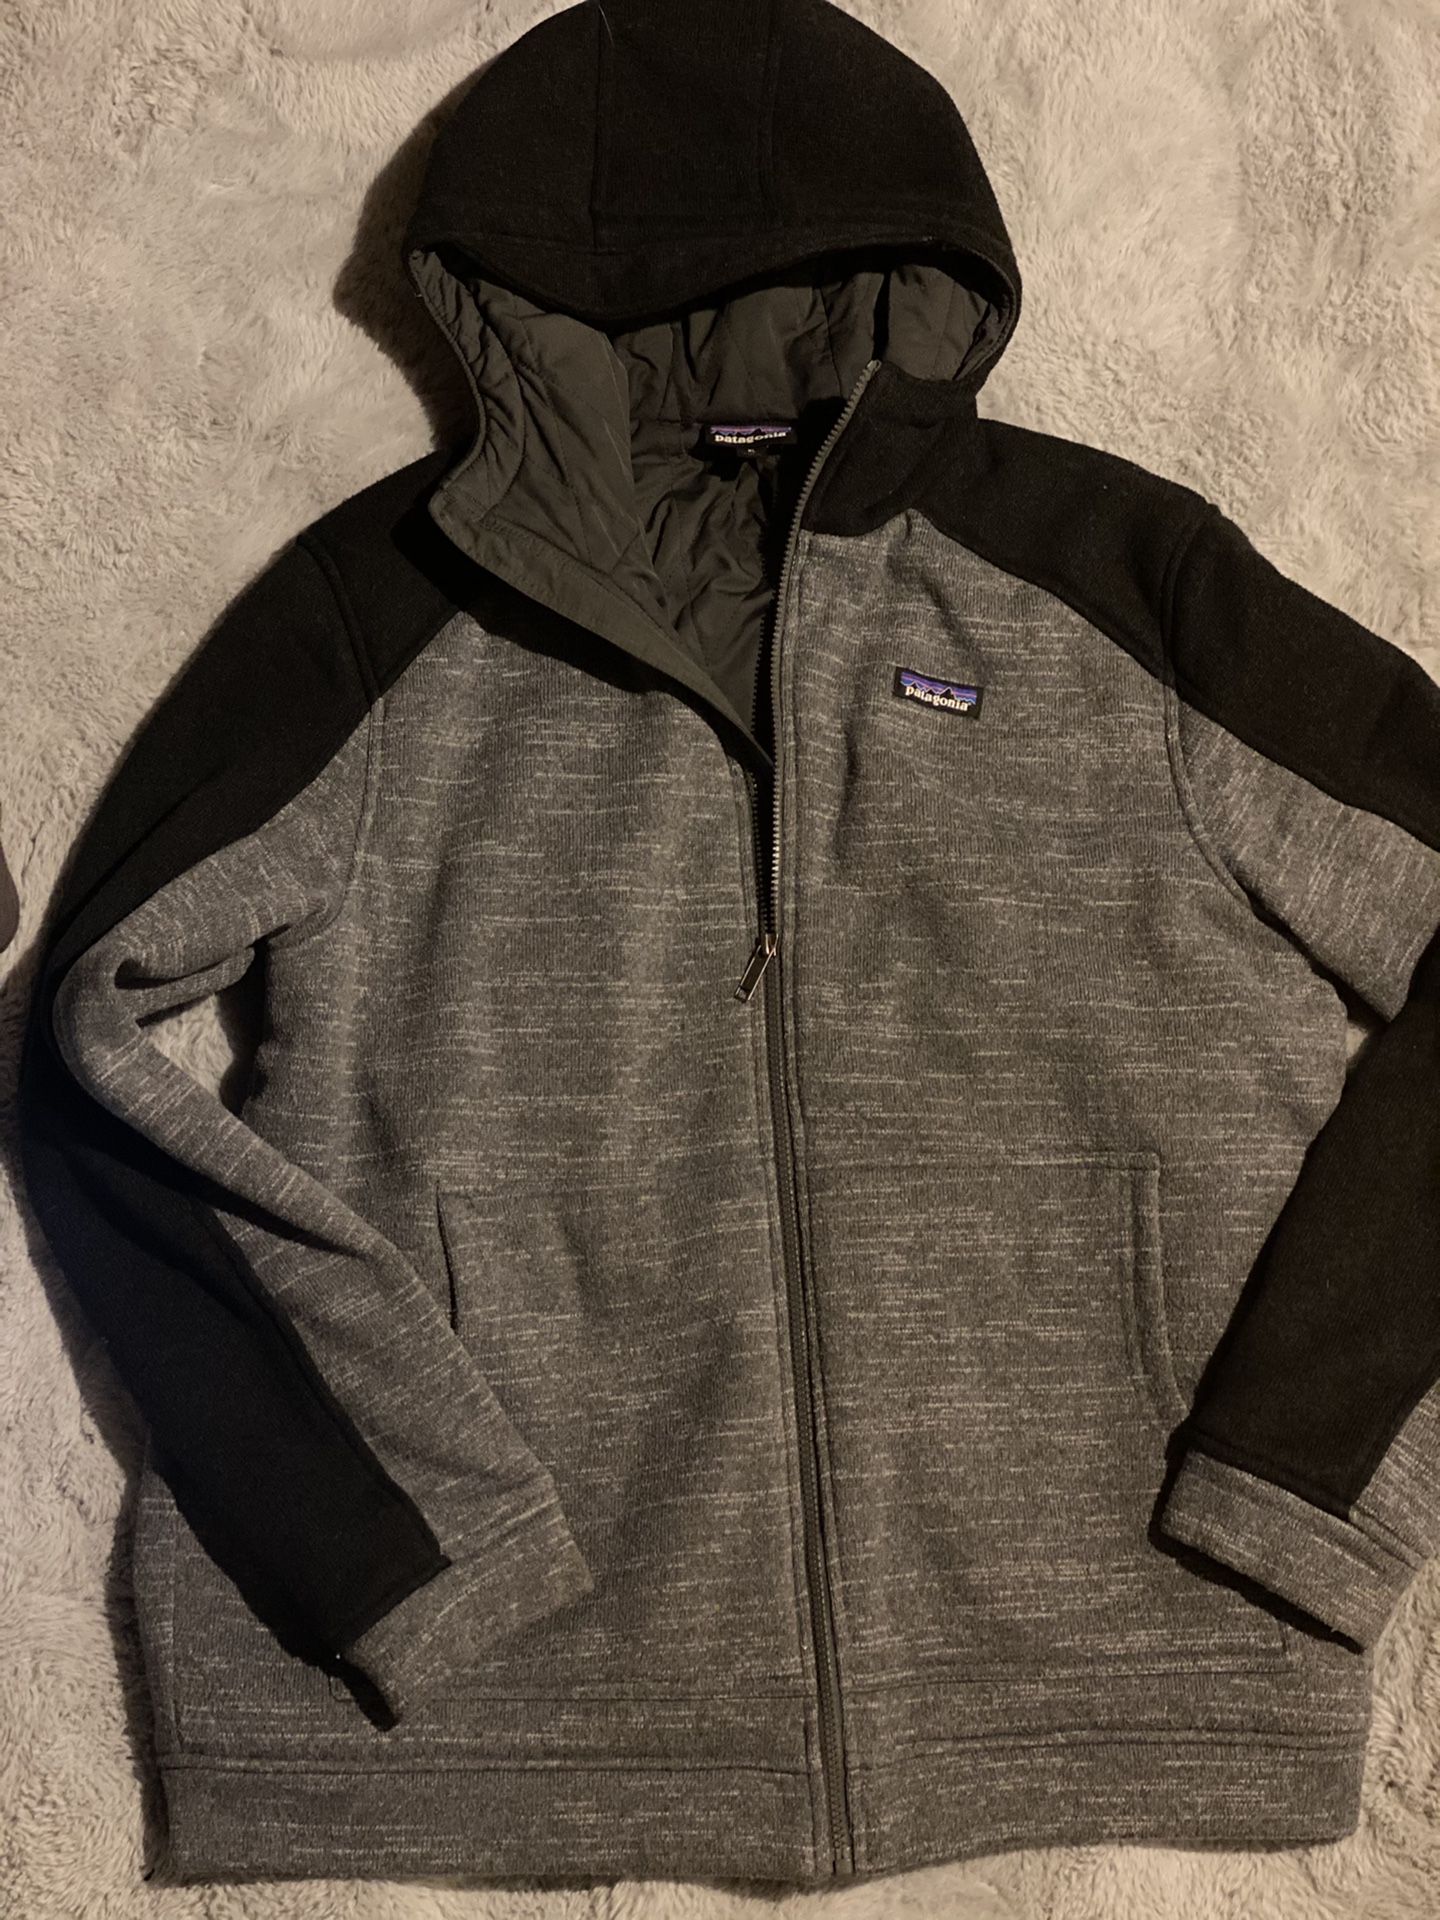 Patagonia men’s lined coat size XL